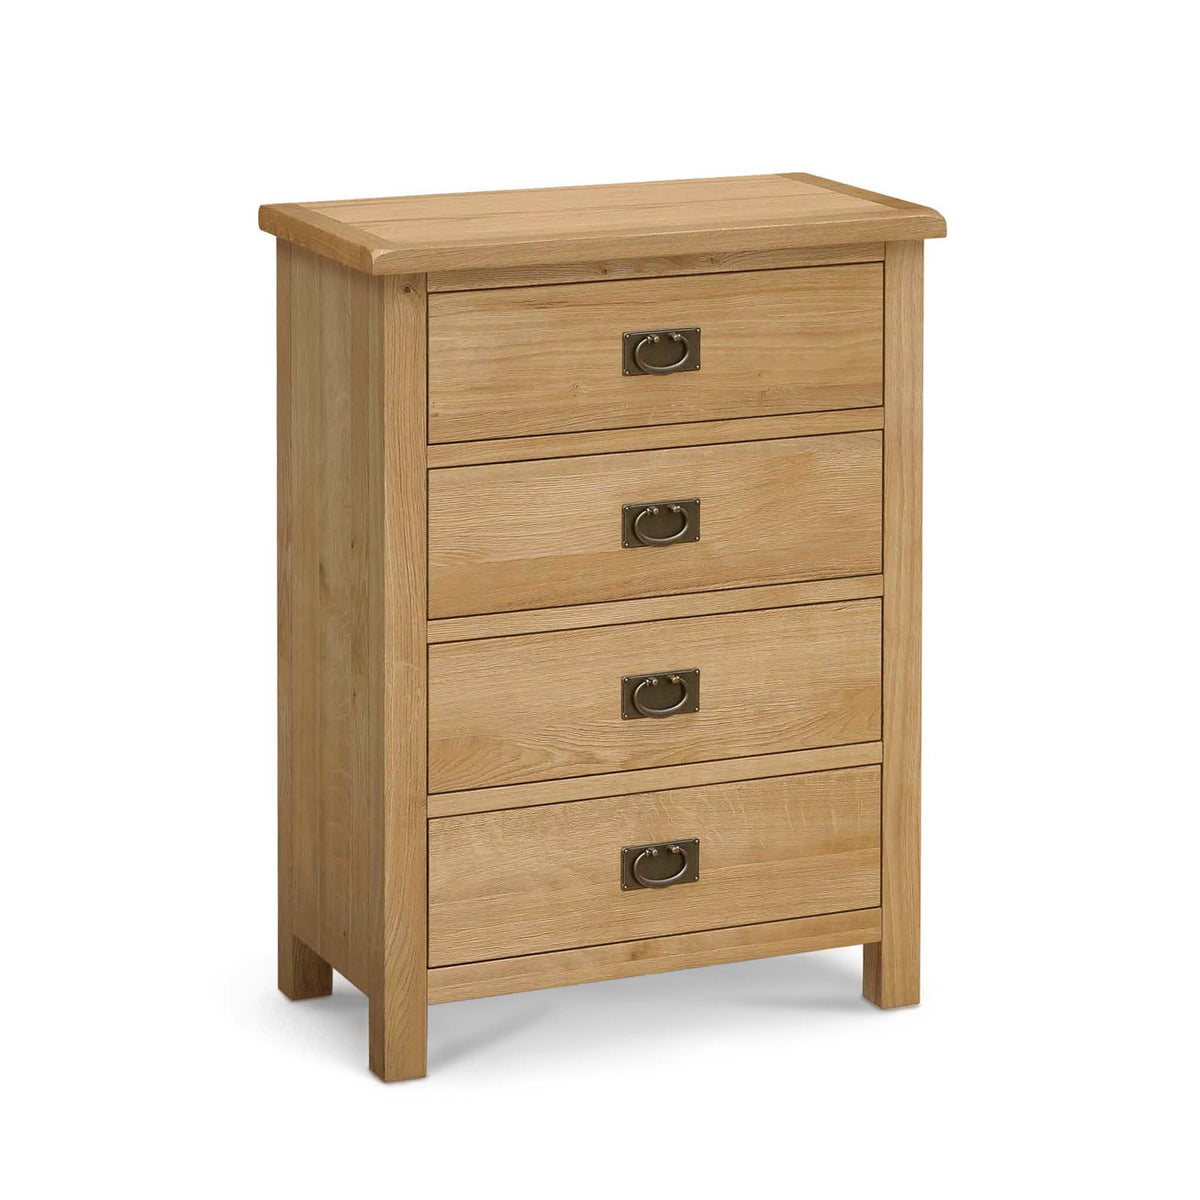 Surrey Oak waxed 4 drawer chest of drawers by Roseland Furniture